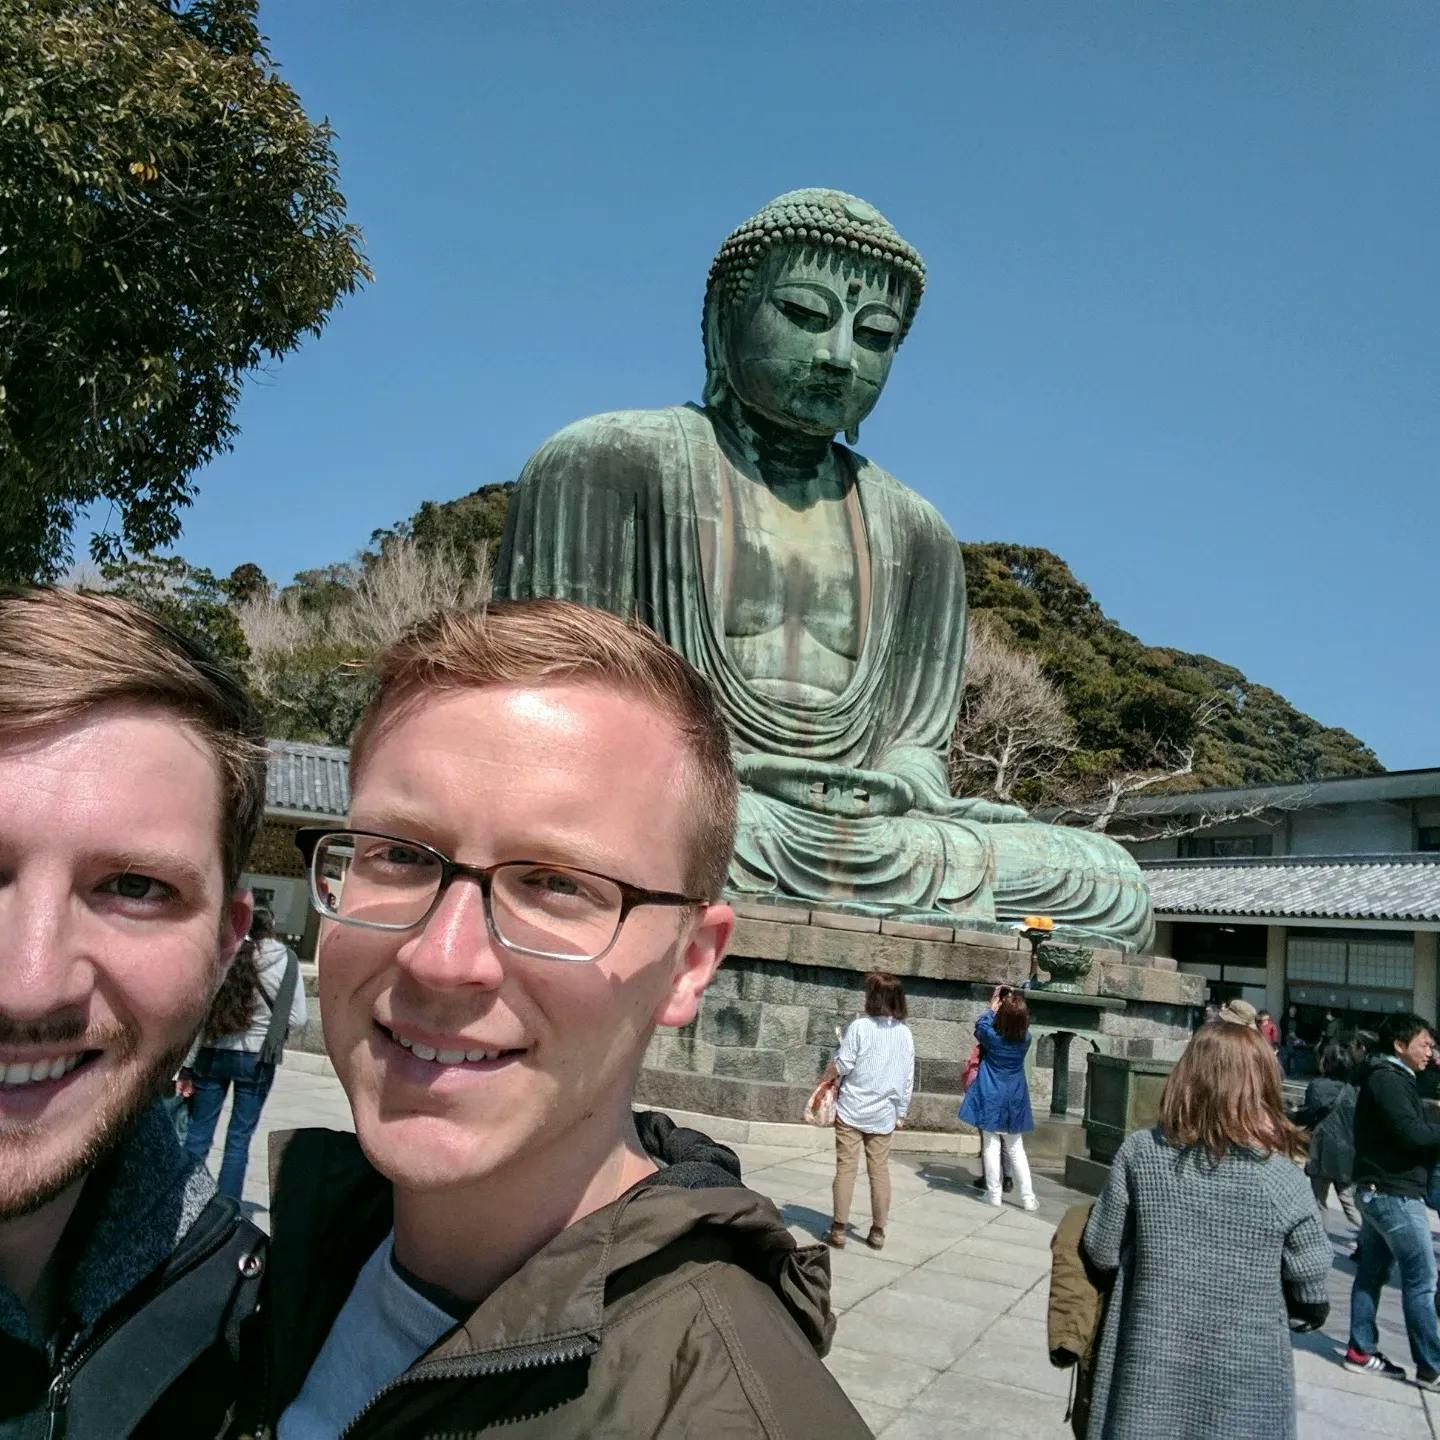 Seeing the sites in Japan